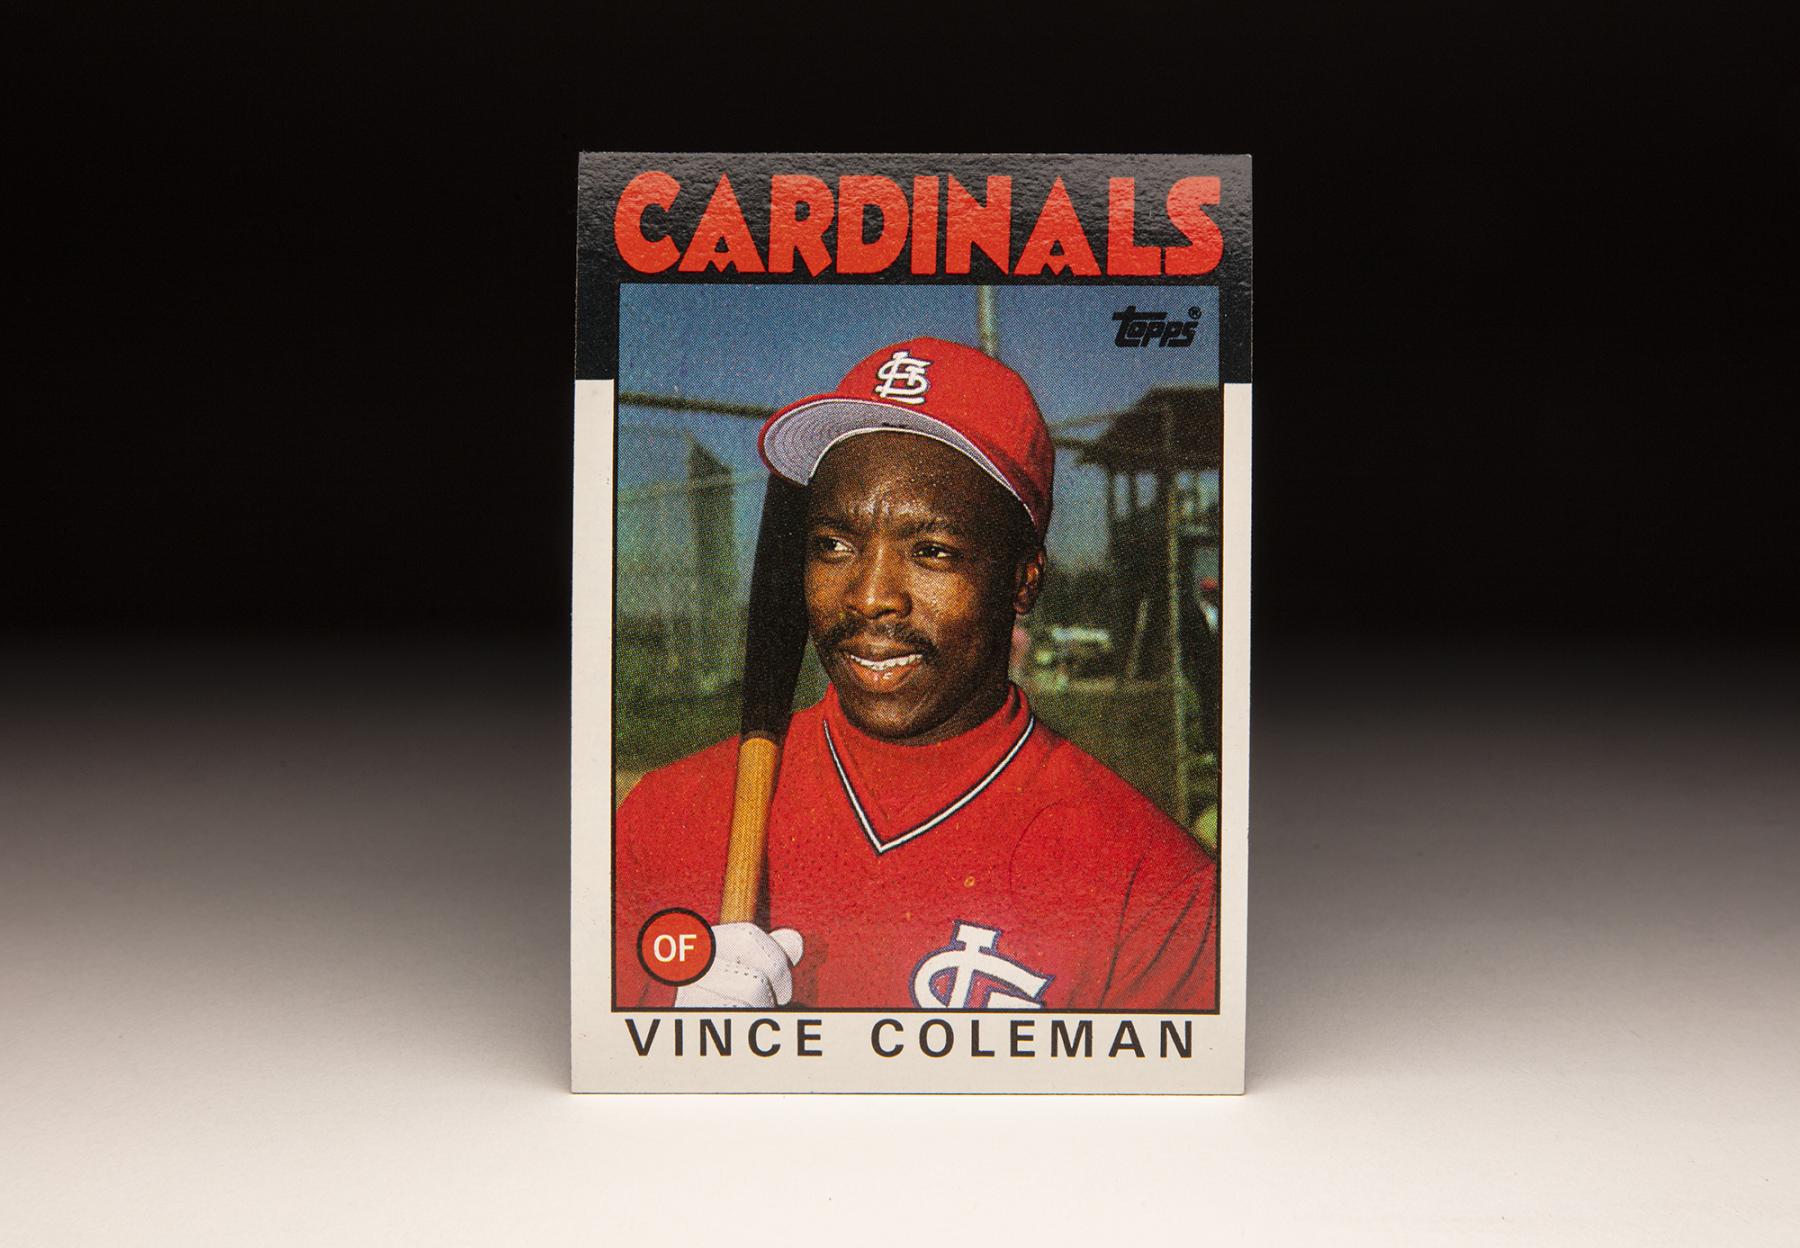 Wife of Vince Coleman